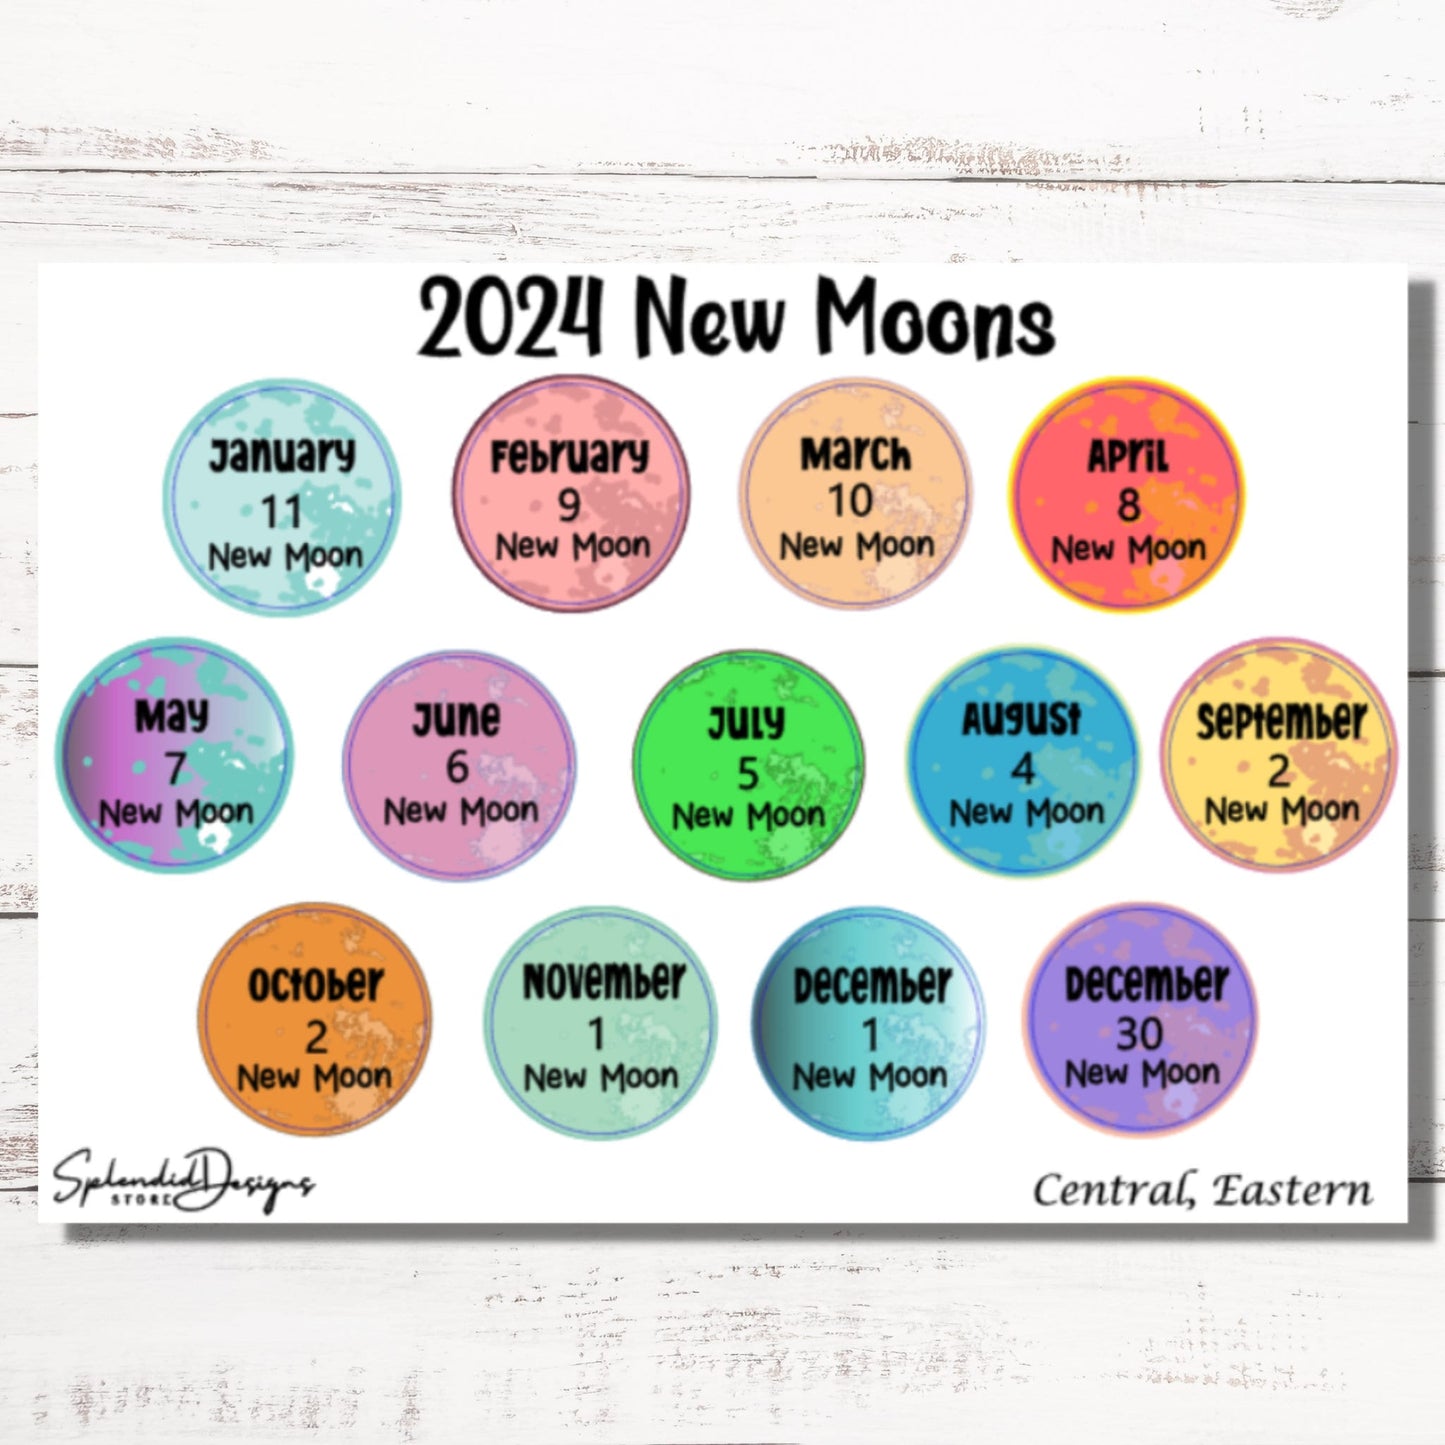 2024 New Moon Stickers by Time Zone | New Moon Planner Stickers, Journal Stickers | Waterproof Vinyl Stickers | 0.75 Inches in Diameter